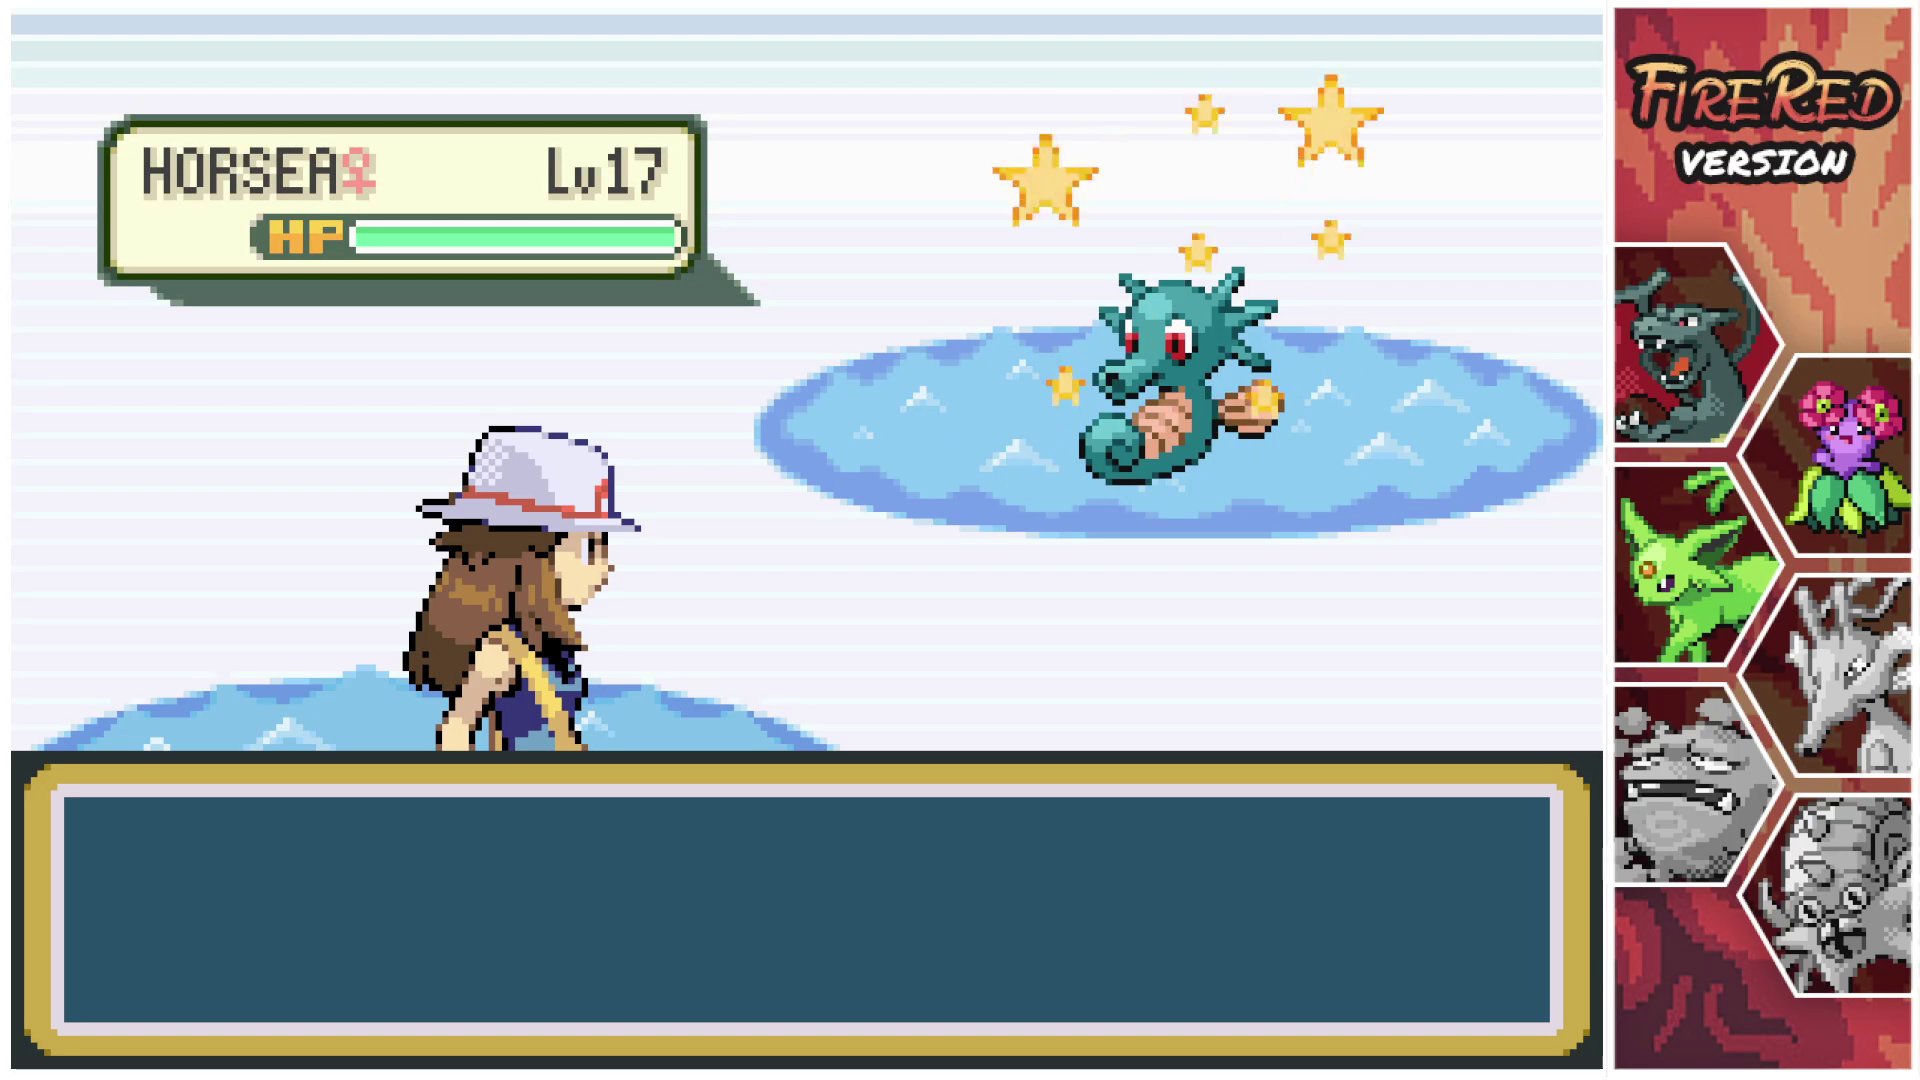 ✨Tibo✨ on Twitter: "Shiny Horsea after fishing encounters! 4th member of my FireRed DTQ! https://t.co/1Ewpzhchx6" /